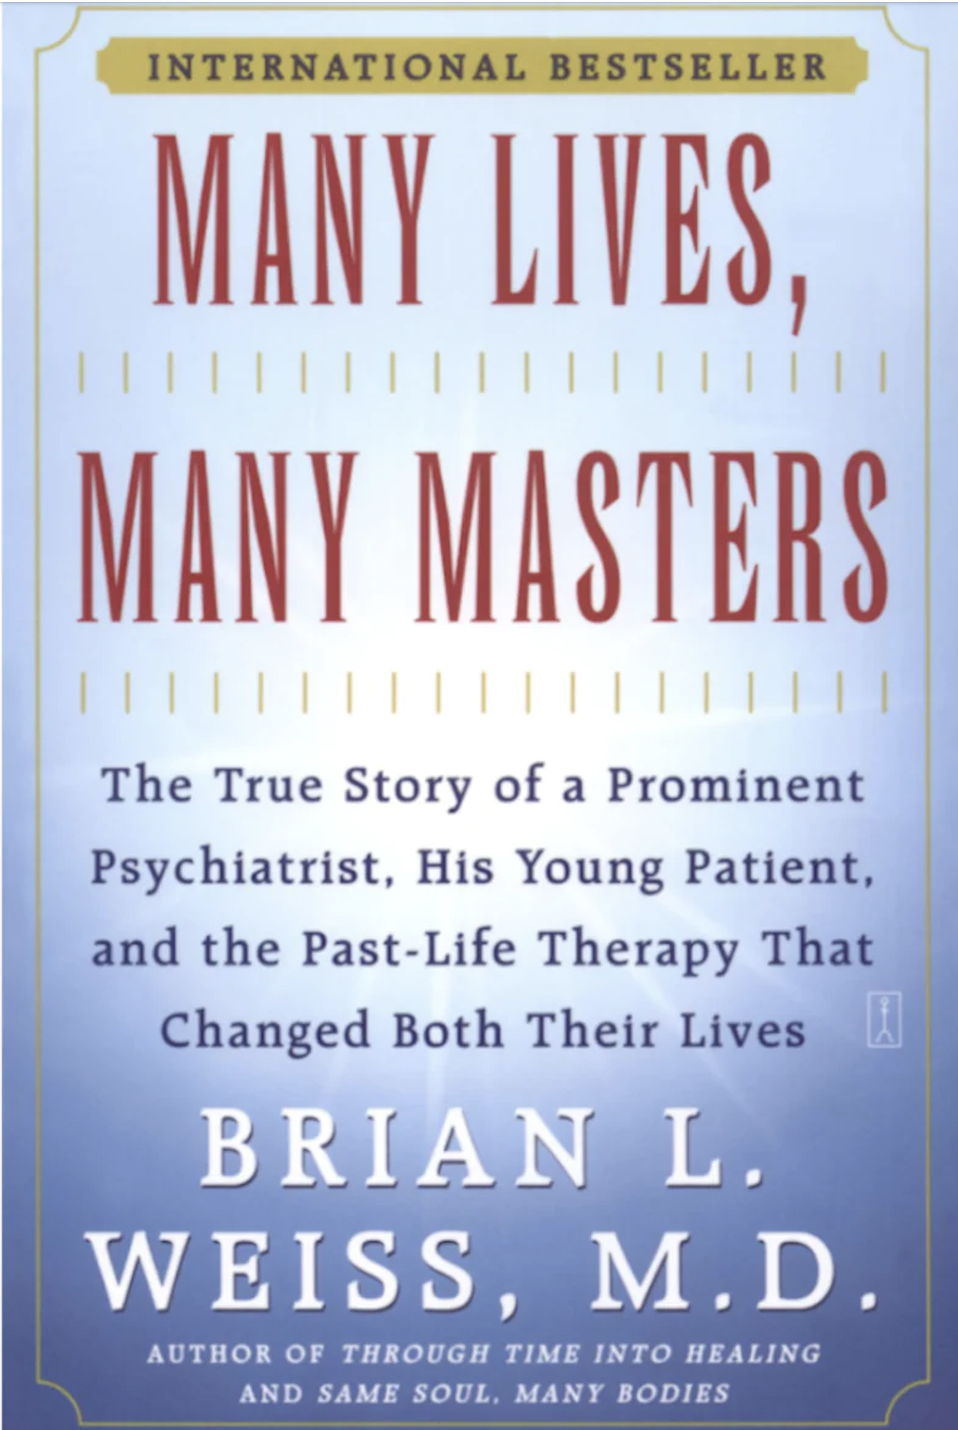 Many Lives, Many Masters by Brian L. Weiss, MD